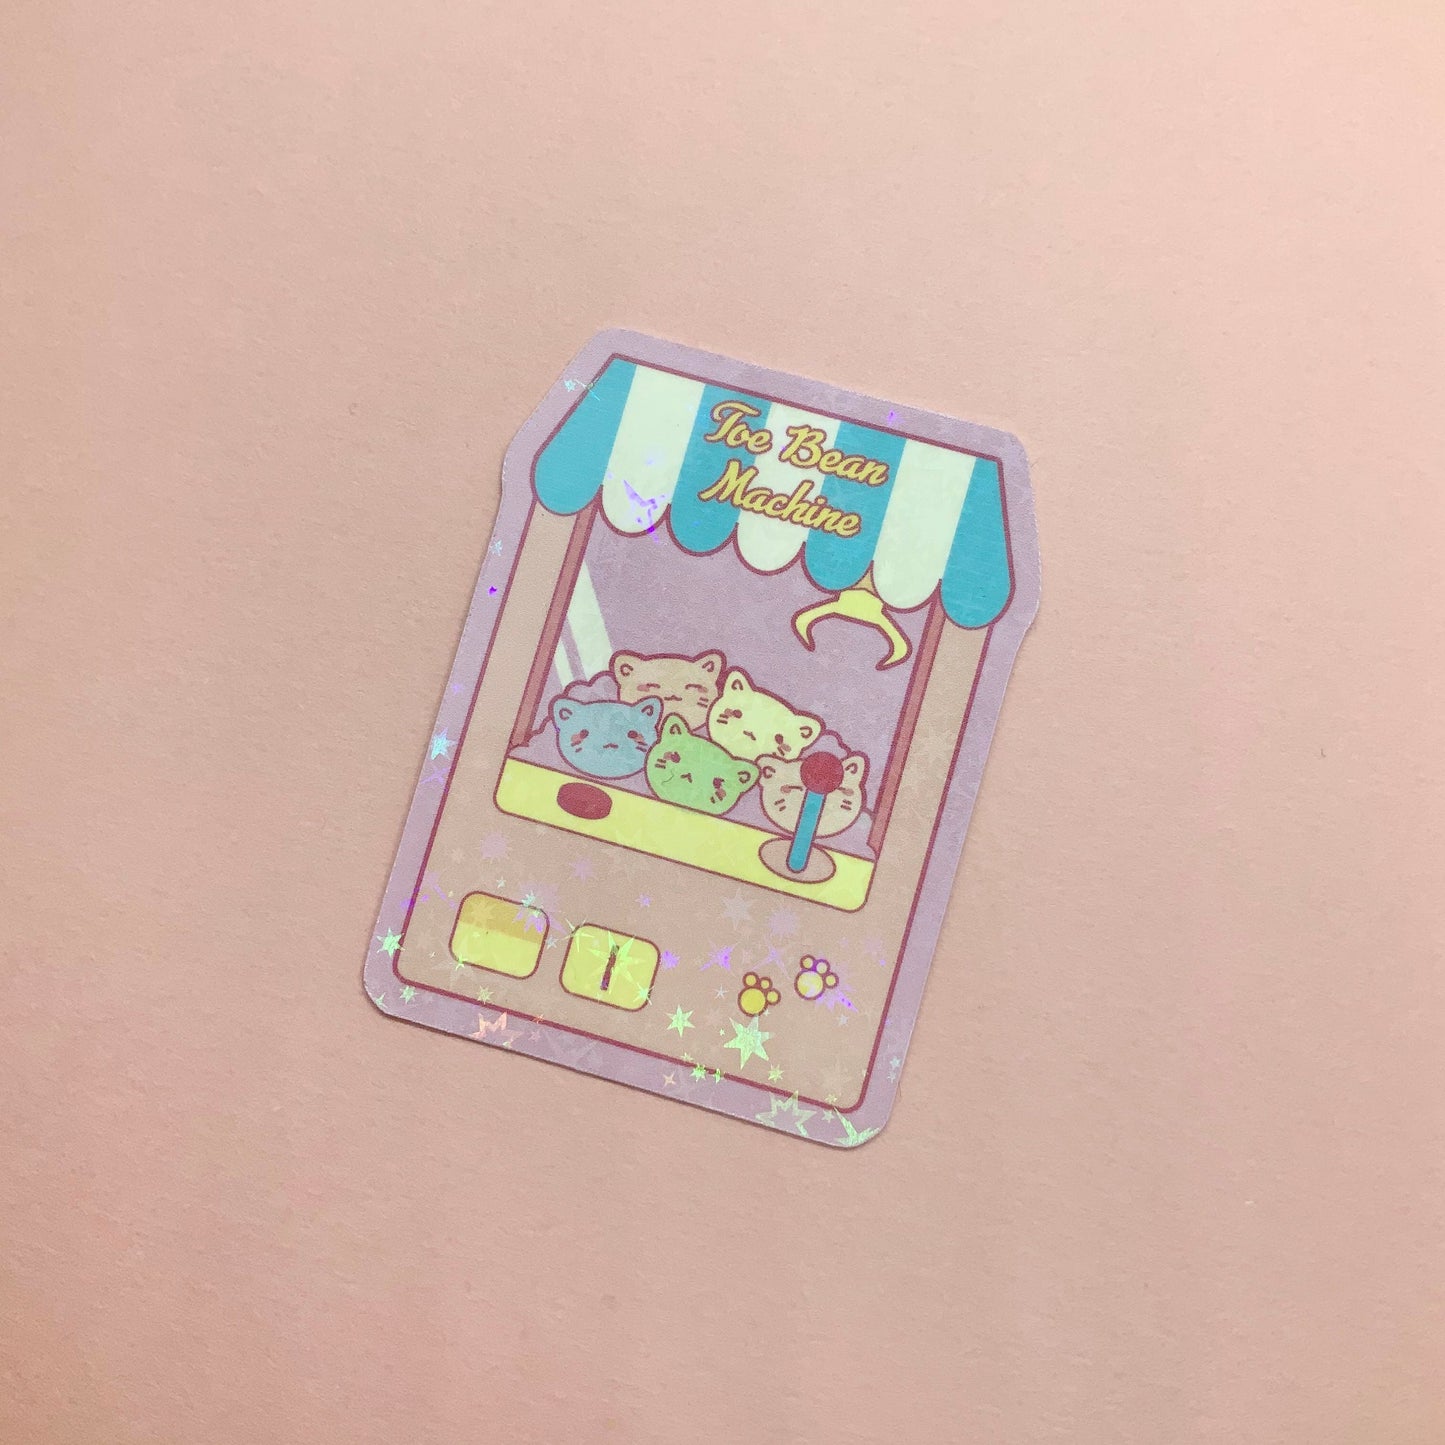 Kitty Claw Machine Arcade ~ Holographic Waterproof Die Cut Sticker ~ Tawny Illustrations